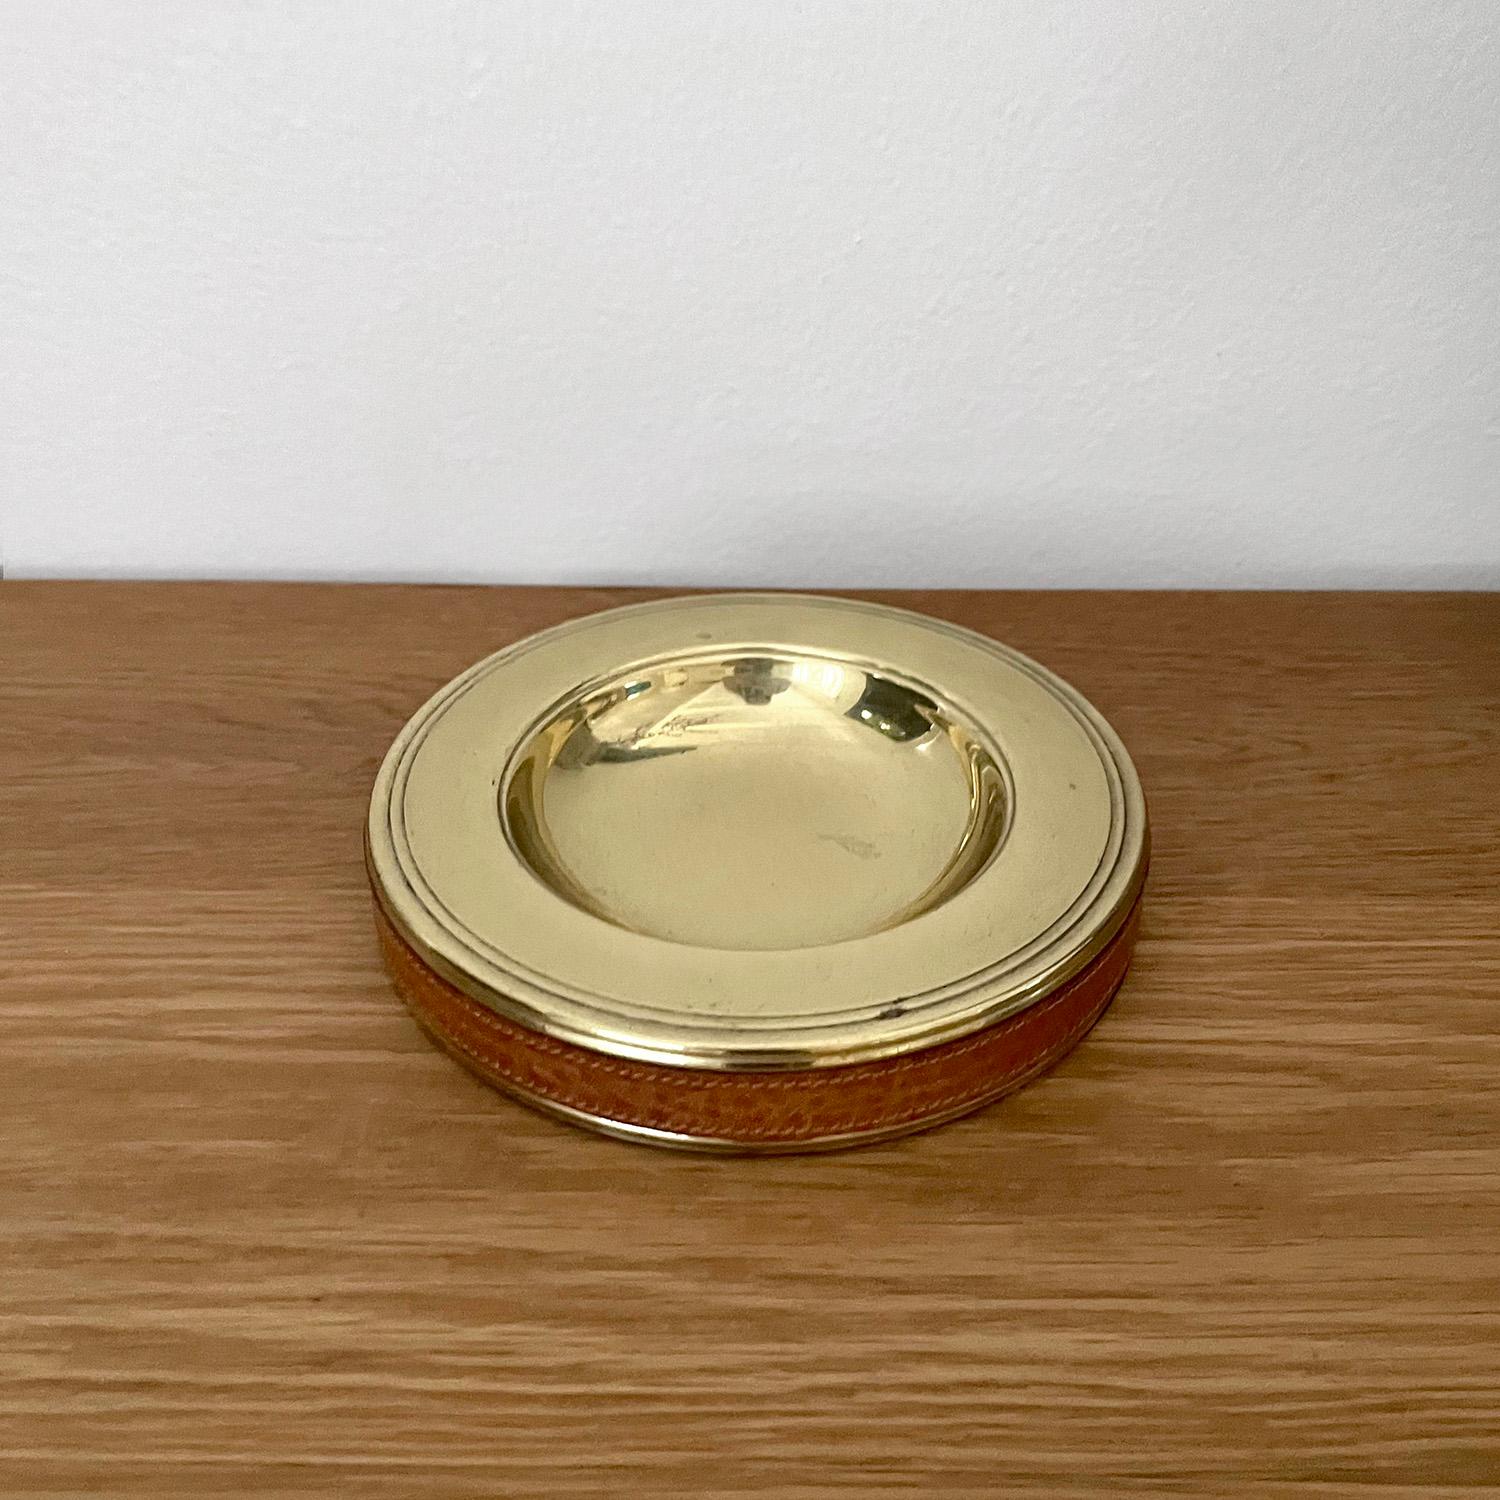 Italian aged brass & leather ashtray 
Italy, circa 1950s 
This handsome piece will be a great addition to any surface
Saddle leather band encompasses the aged brass ashtray
Light surface markings 
Patina from age and use 
This listing is for a